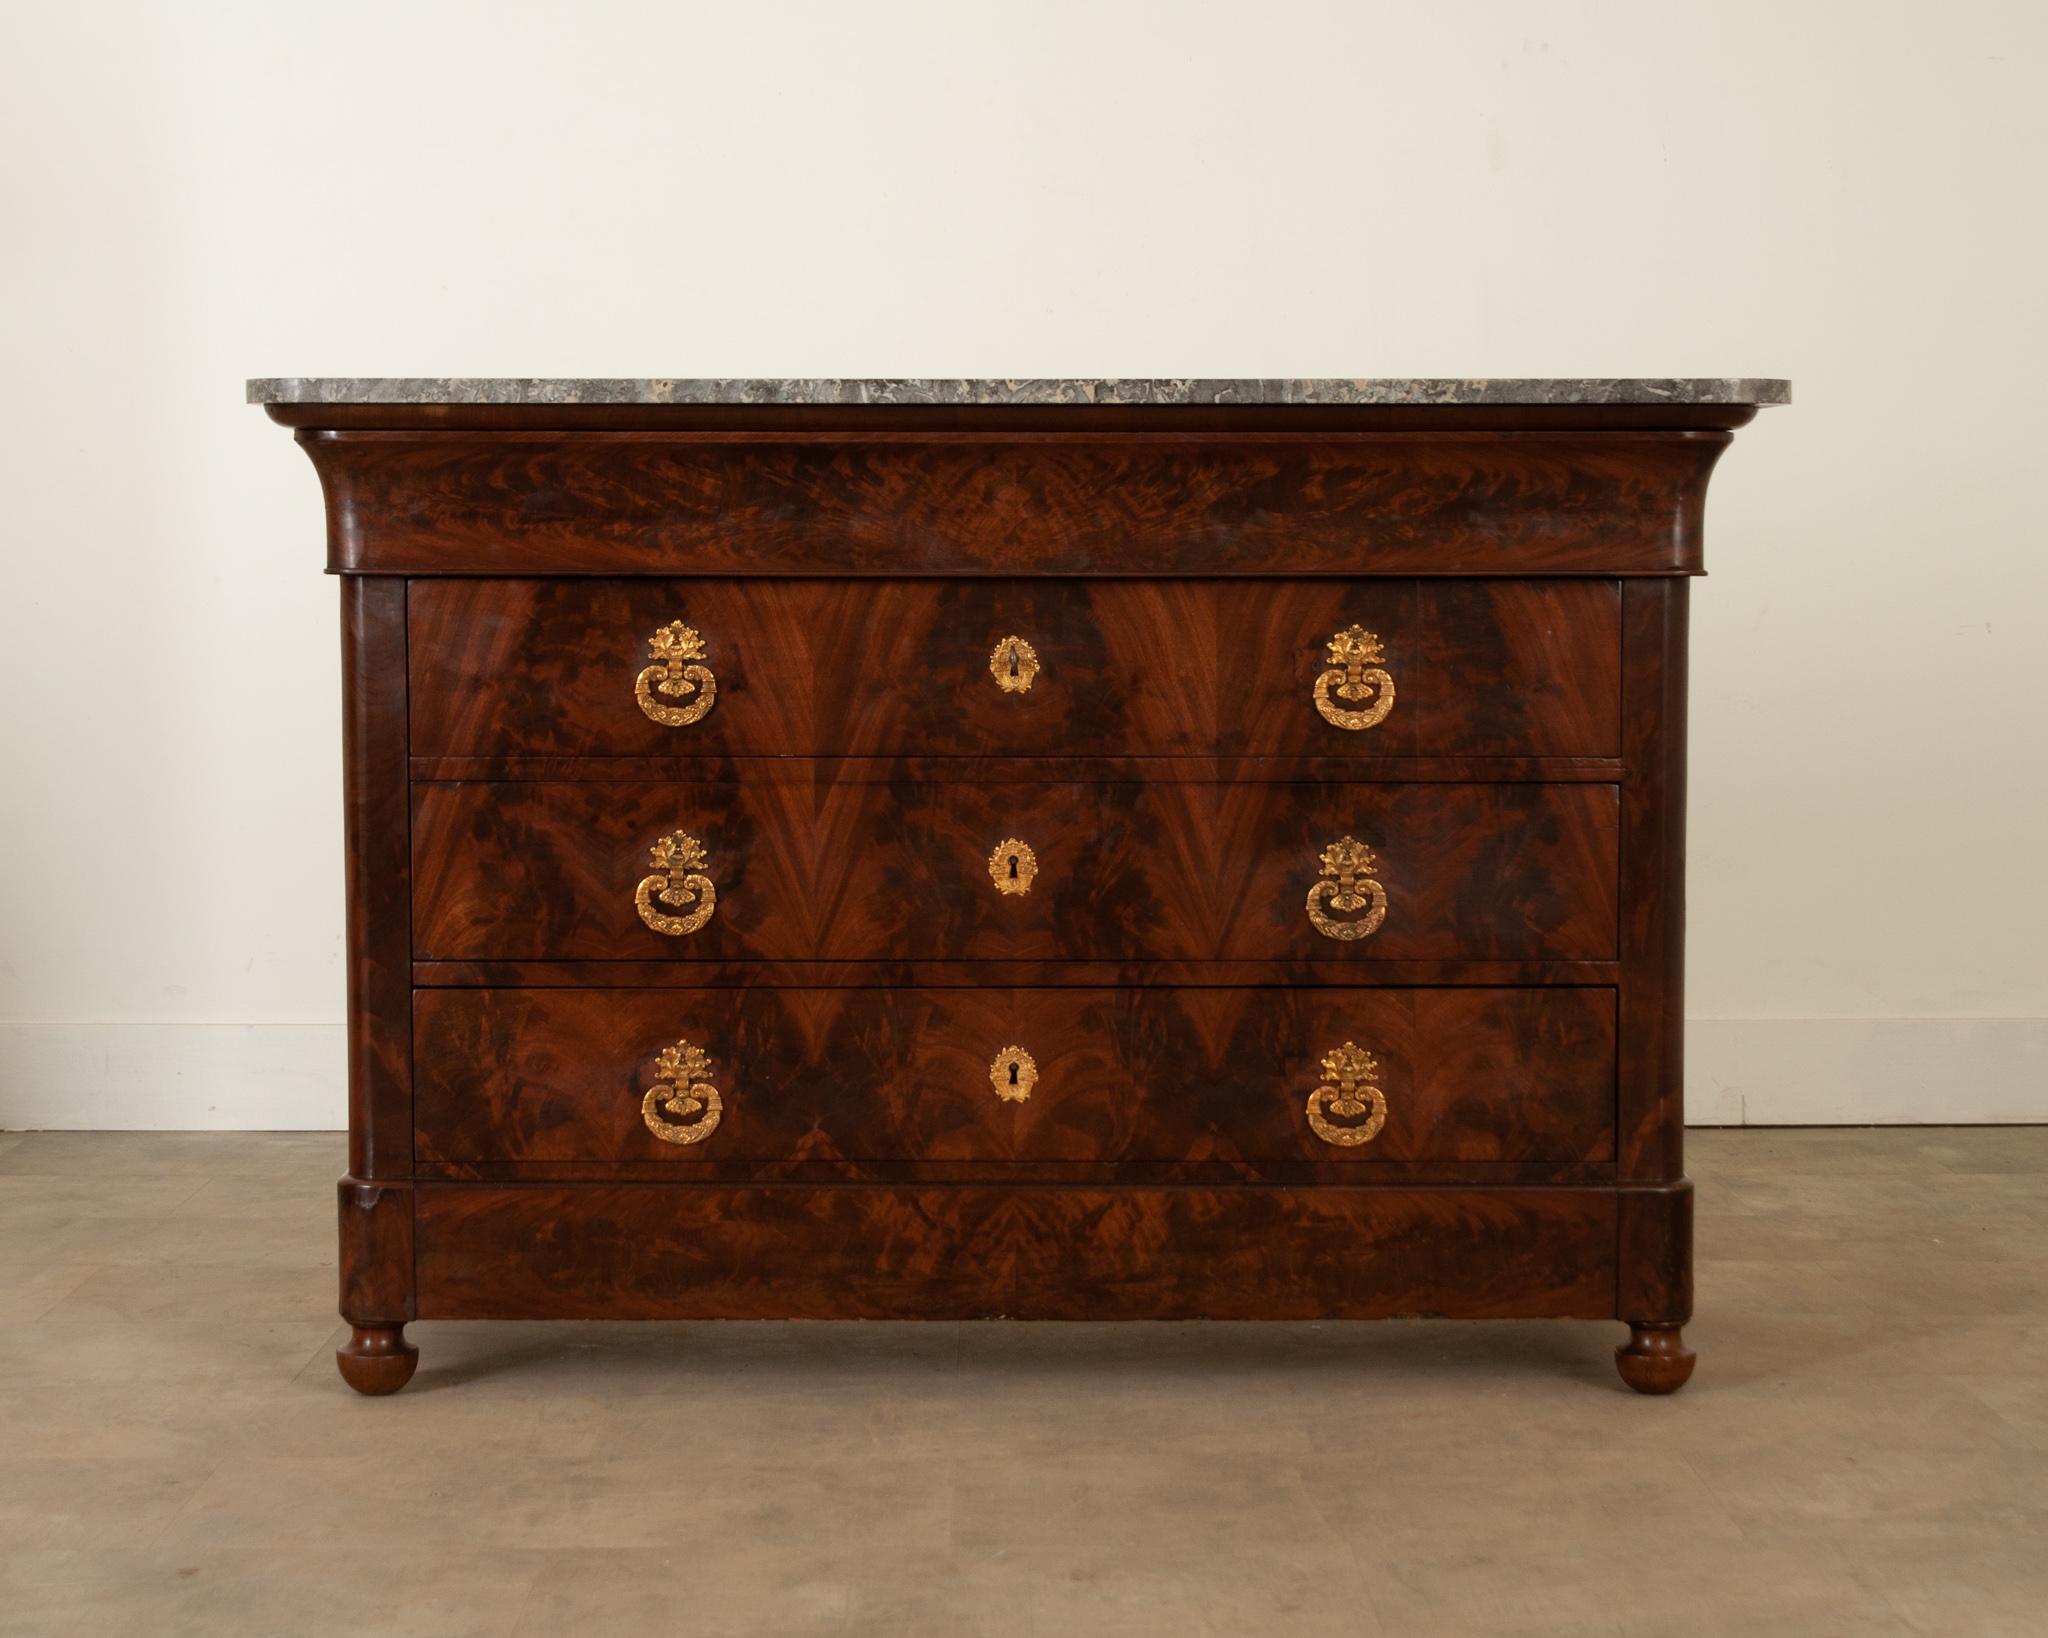 This Louis Philippe style commode is crafted from stunning burl mahogany. The charcoal and white St Anne Gris marble top is original to the piece and has rounded front corners. The apron houses a hidden drawer atop three of the strikingly